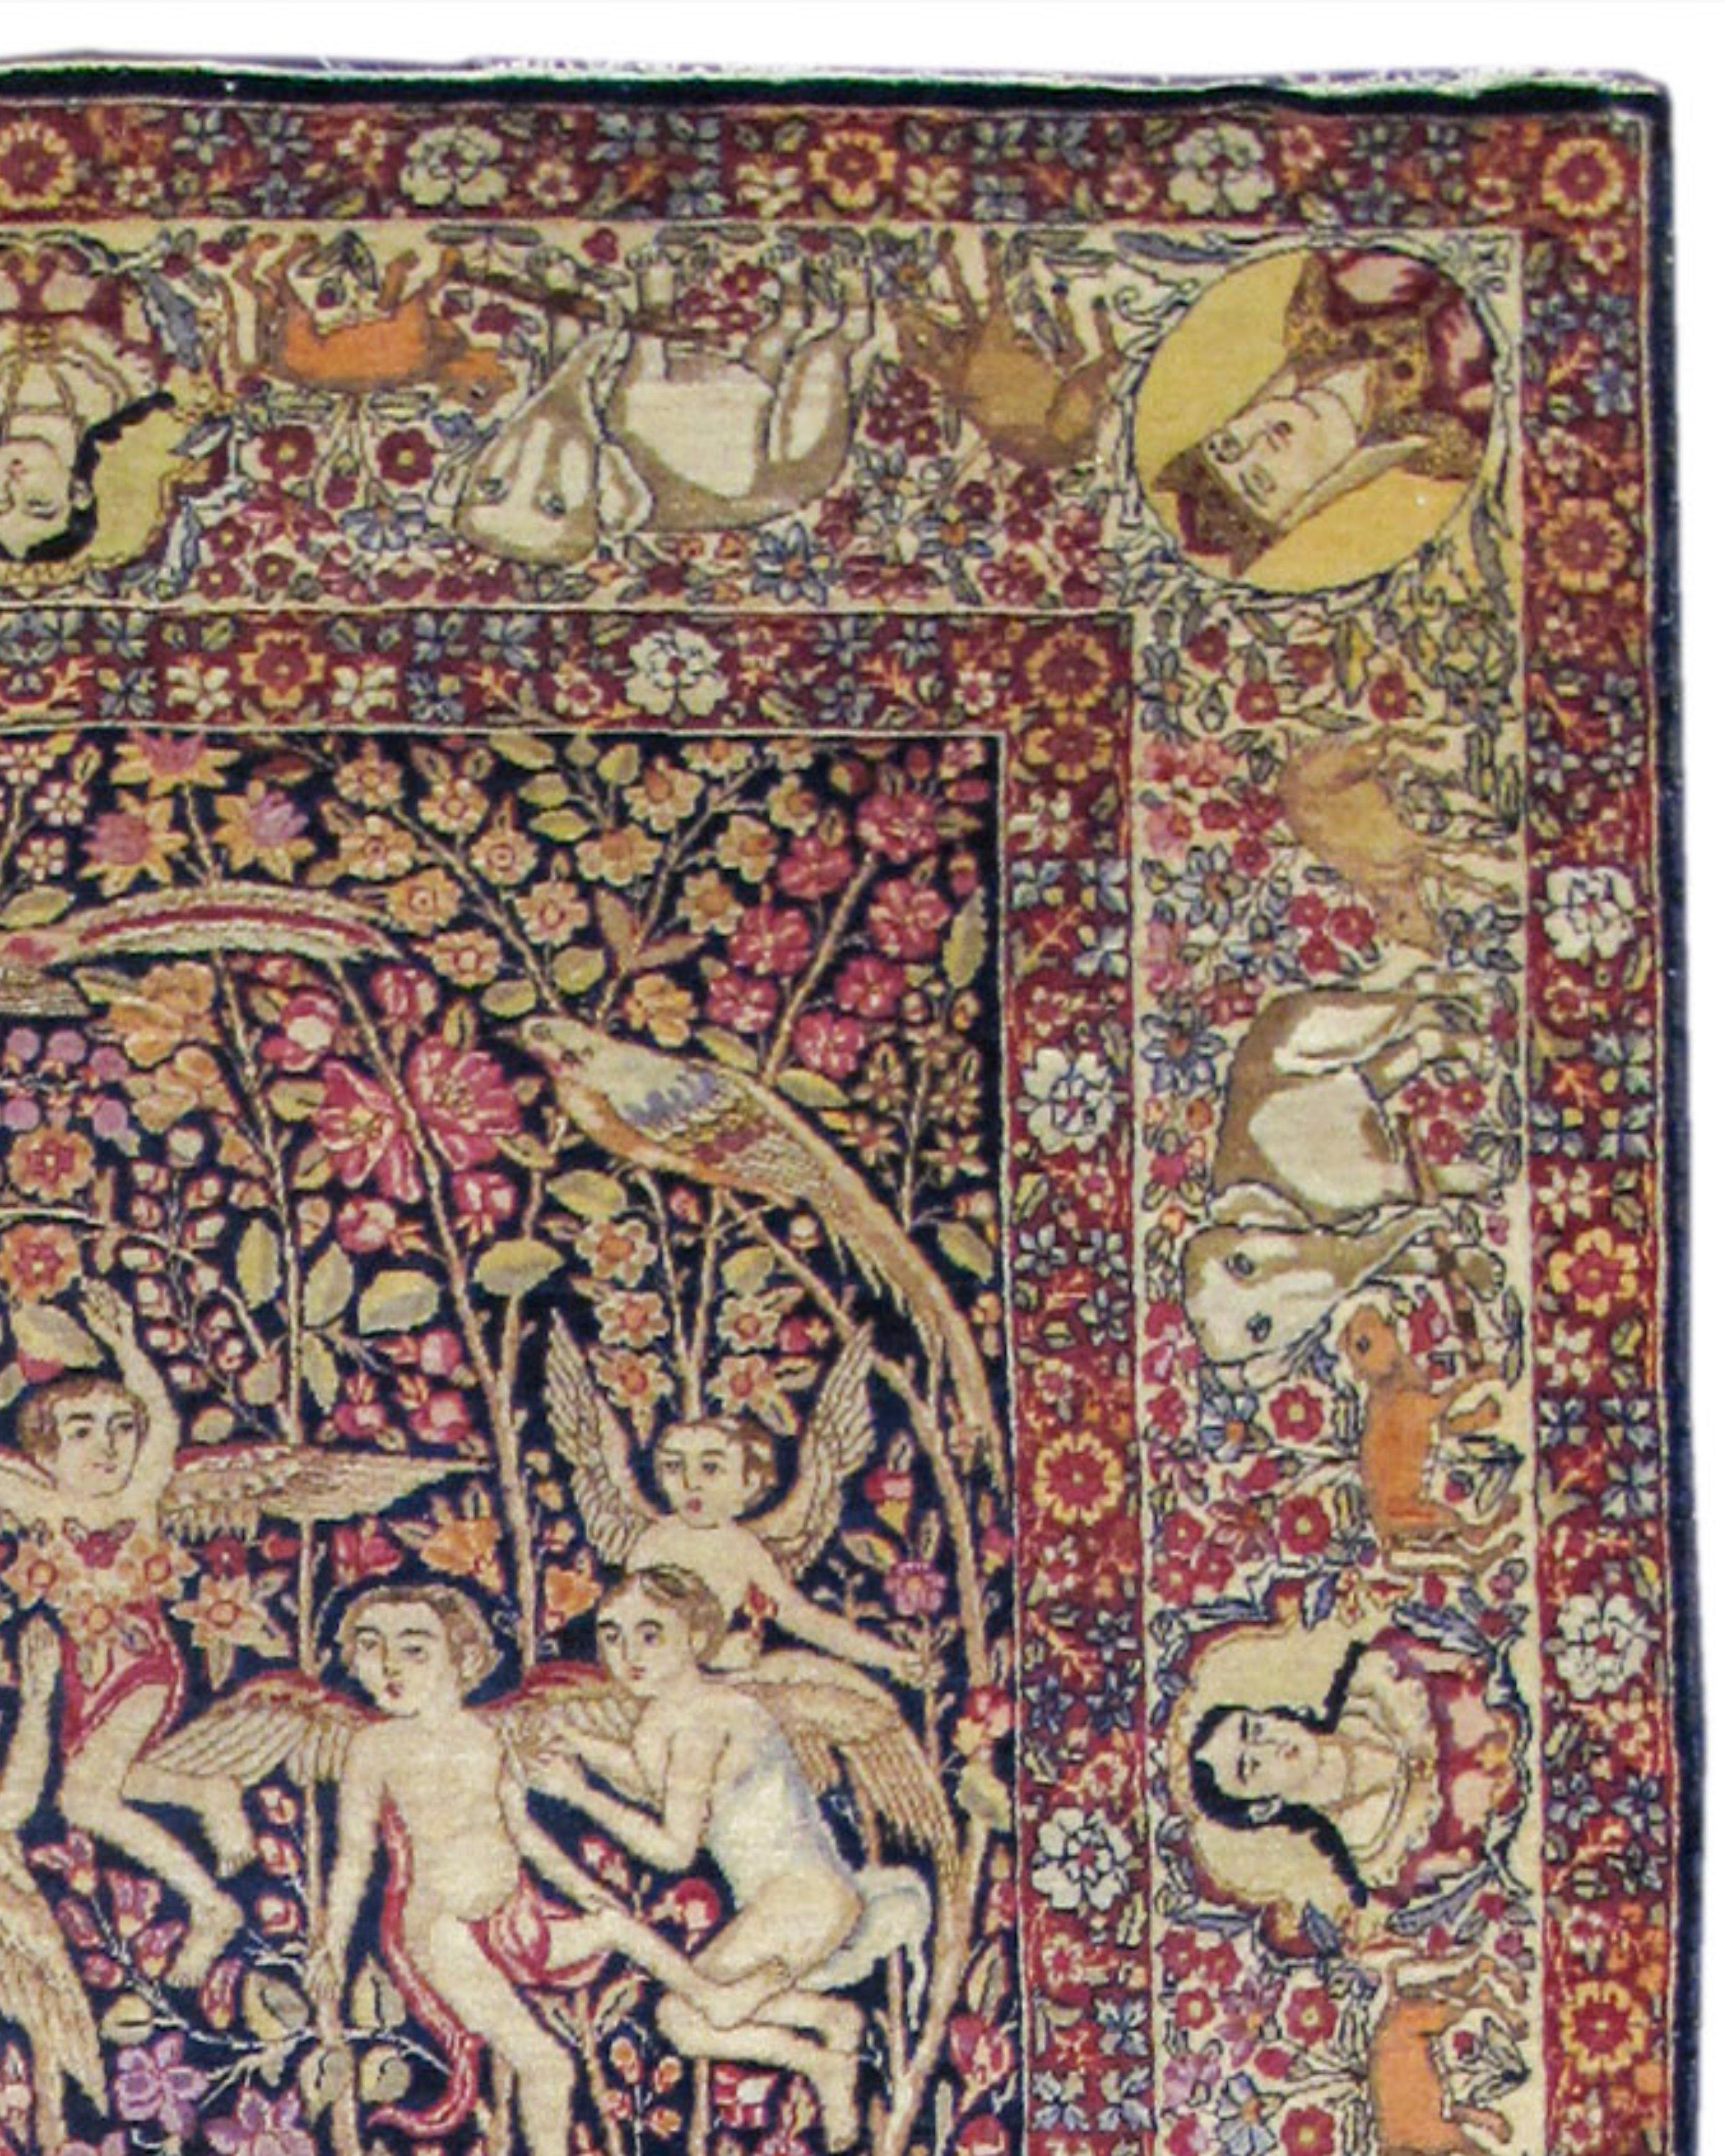 Antique Persian Kirman Pictorial Rug, 19th Century

Additional information:
Dimensions: 4'4